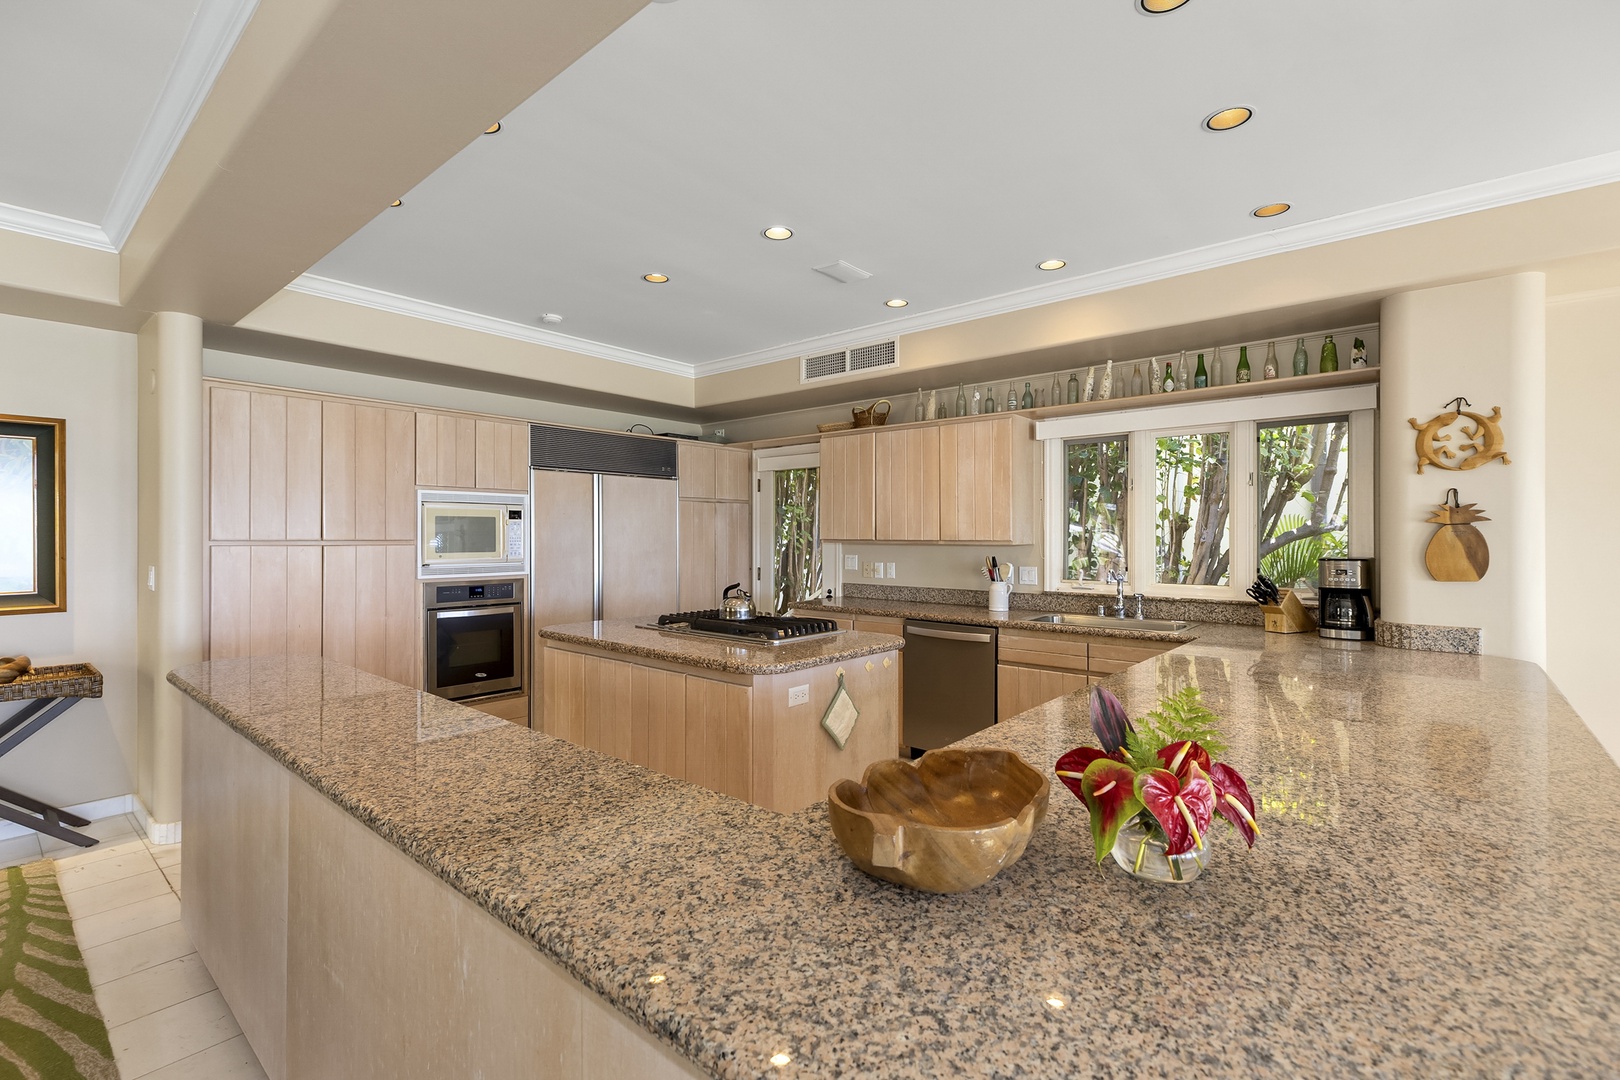 Honolulu Vacation Rentals, Diamond Head Surf House - Kitchen is spacious with plenty of counter space.